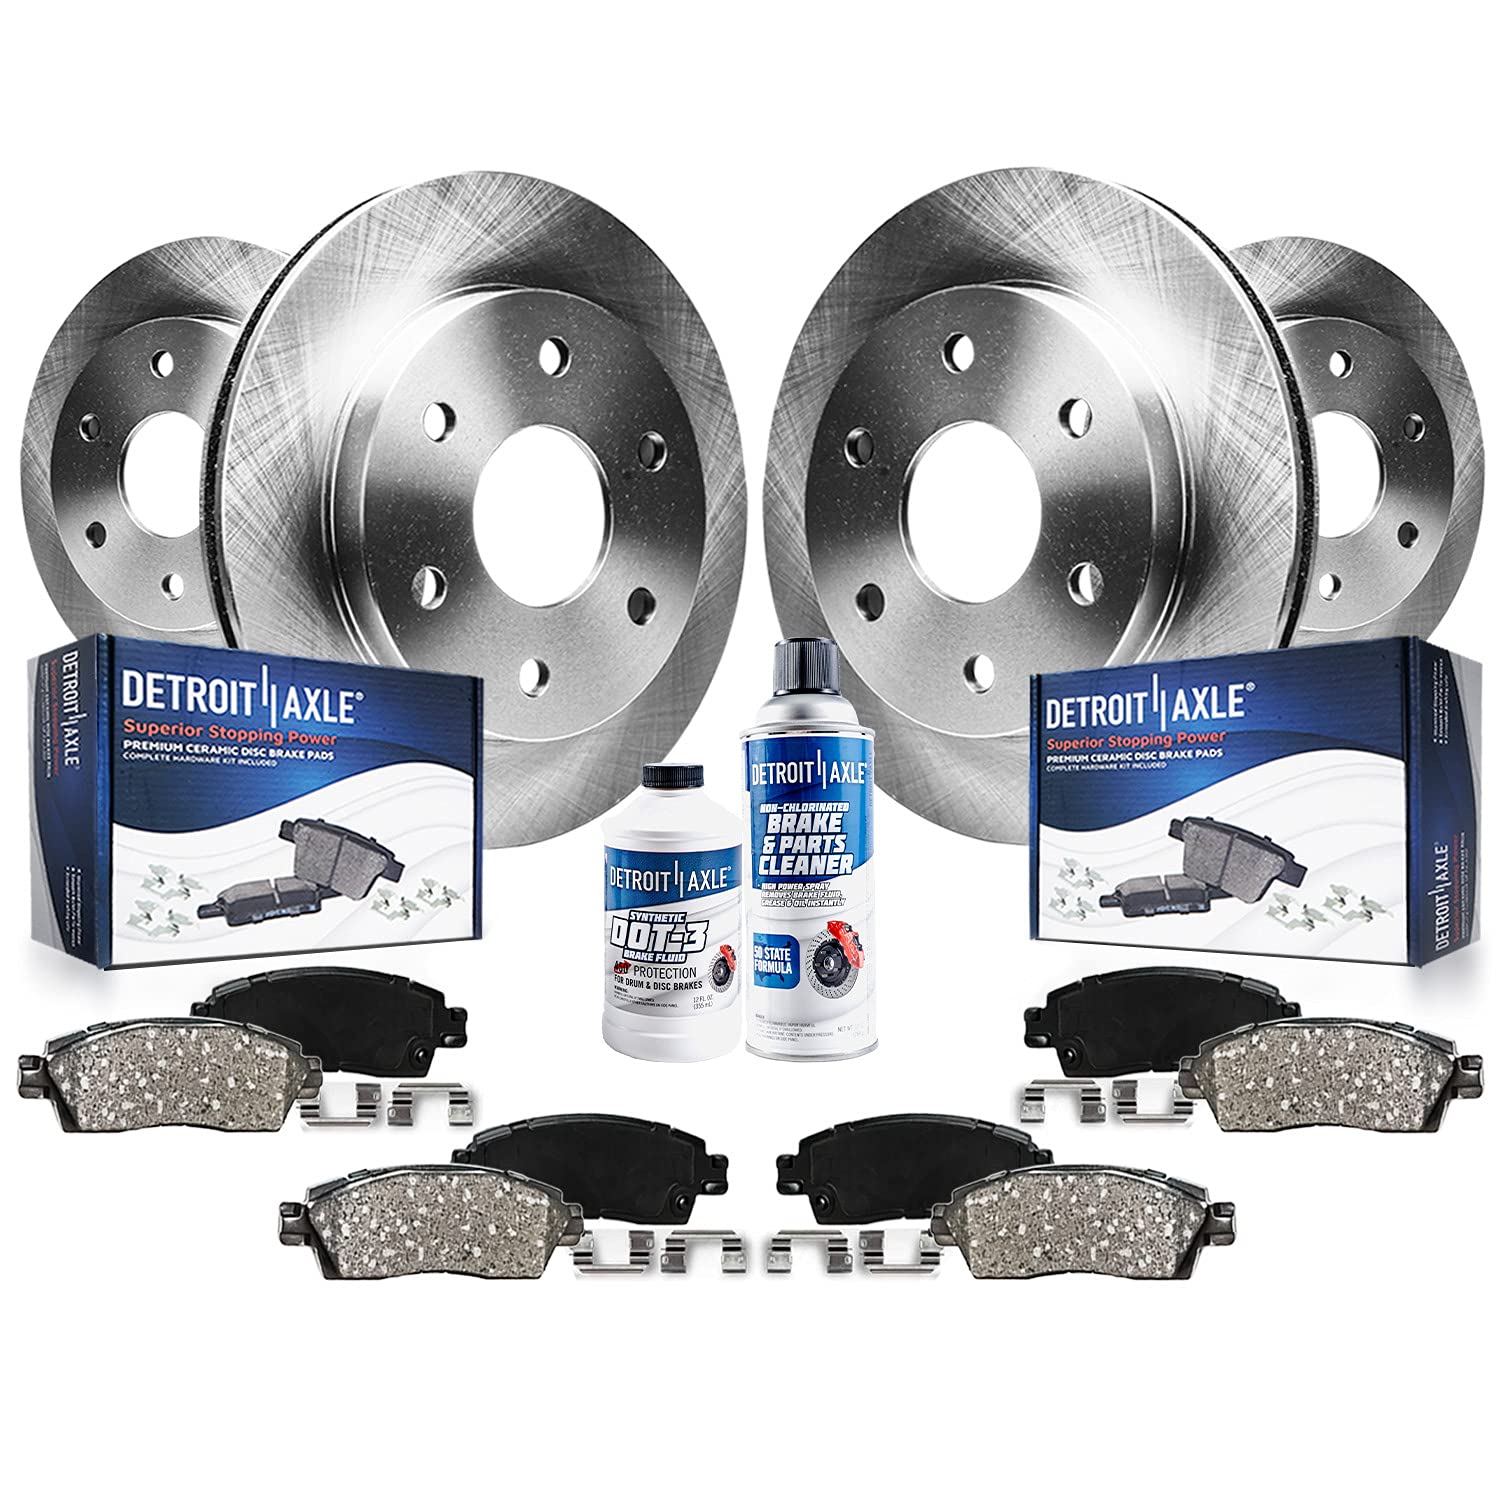 Detroit Axle - Brake Kit for 2007 2008 2009 Ford Expedition Lincoln Navigator Brakes Rotors and Ceramic Brake Pads Front & Rear Replacement